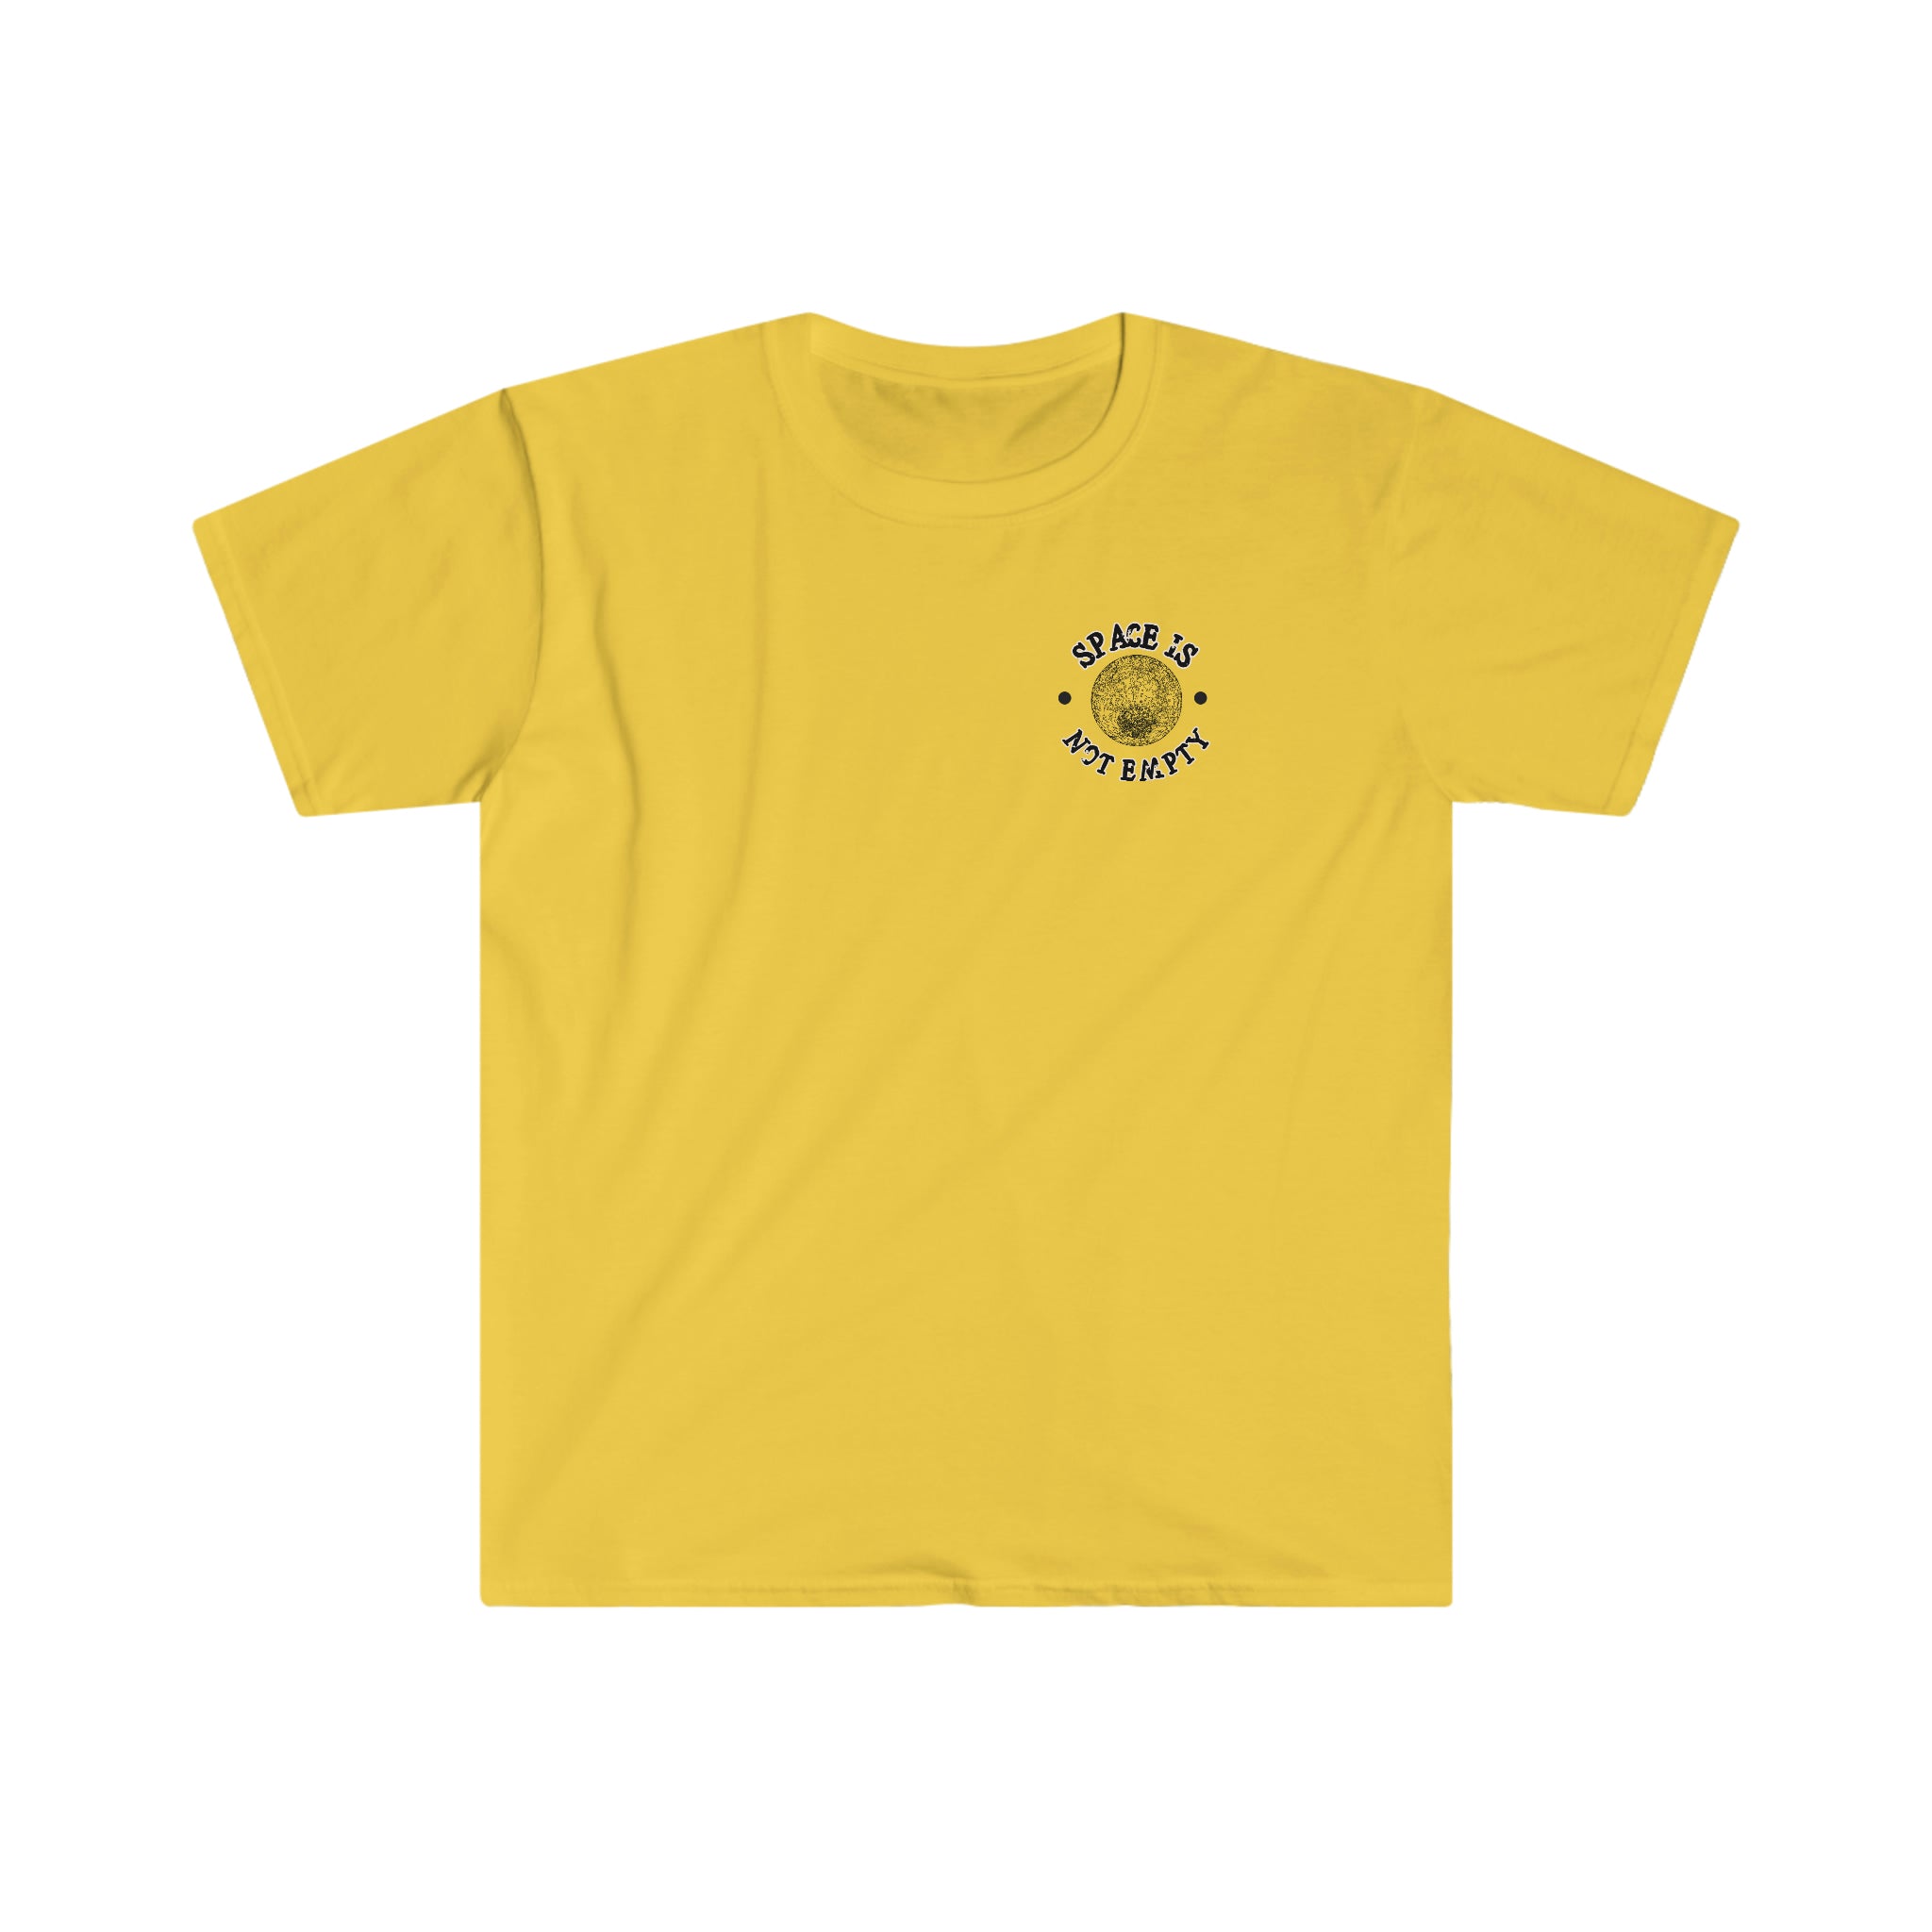 A yellow cotton Space is Waiting T-Shirt with a black logo on it.